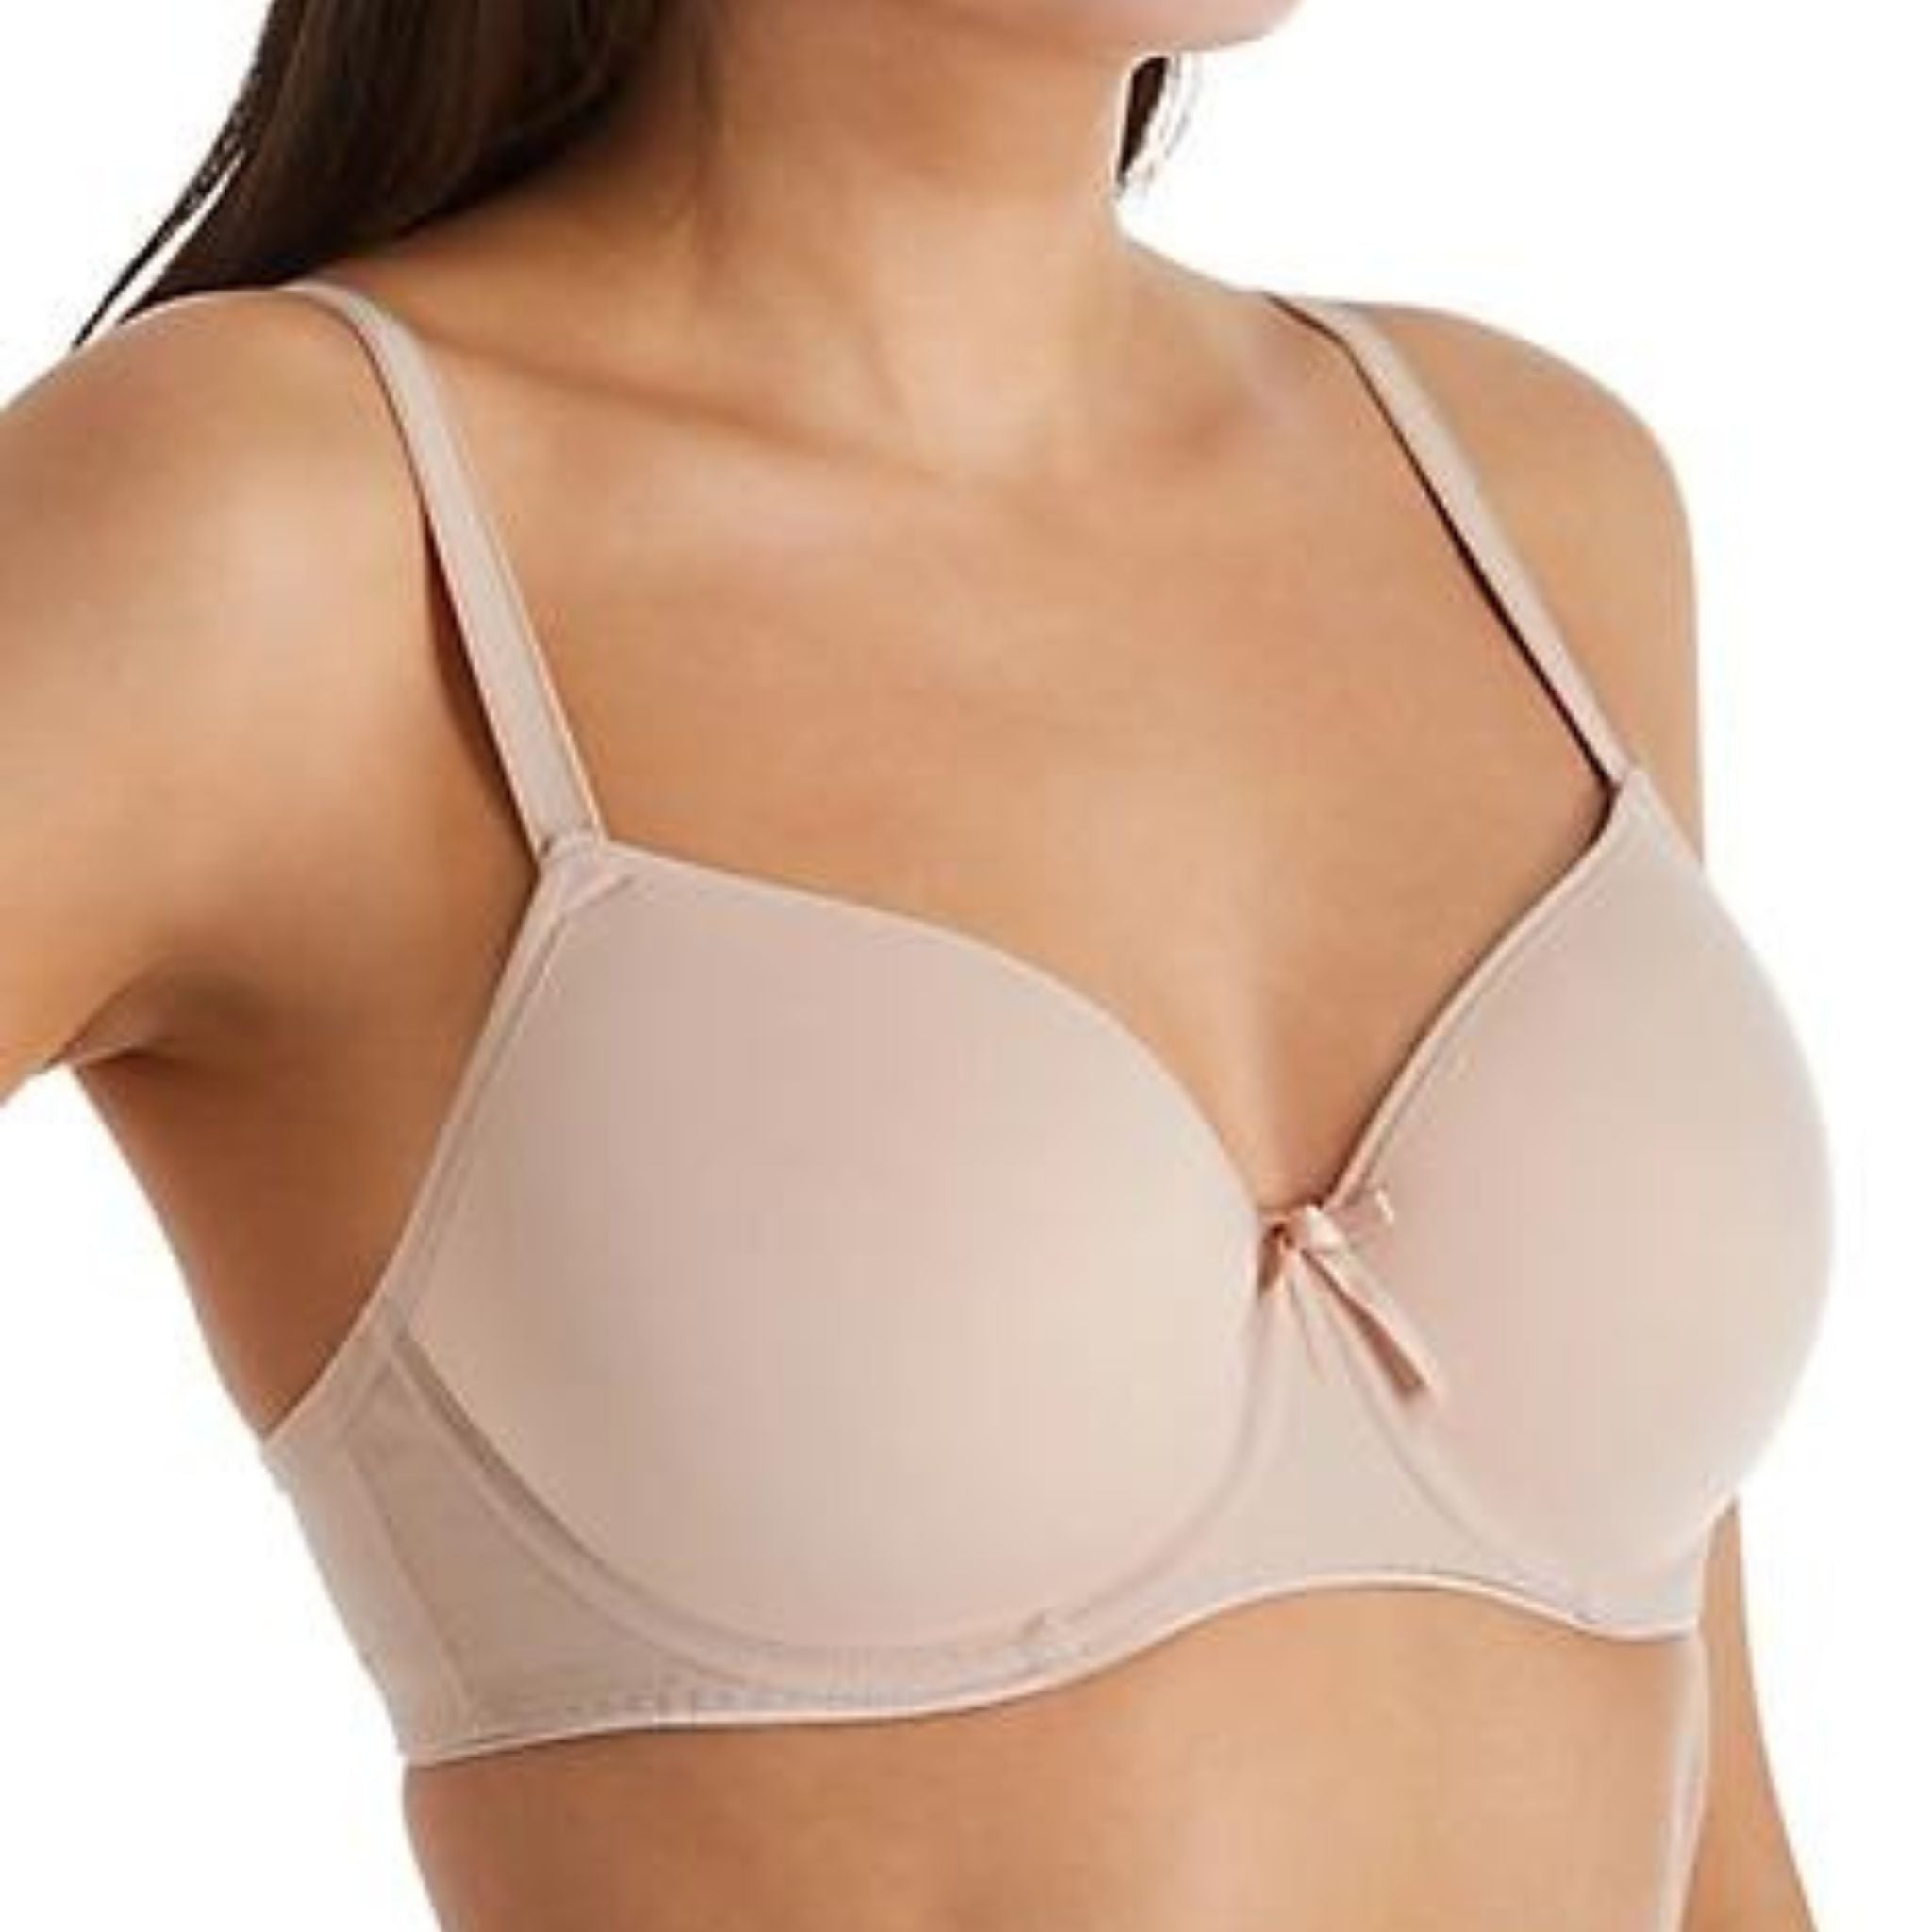 The balcony design offers good coverage and a natural rounded shape, perfectly designed to be teamed with other styles in the Freya Fancies collection or mixed and matched for a new look every day.  Smooth seam free moulded bra with neck edge binding  Balcony cups offer good coverage and a natural rounded shape  Fixed fully adjustable straps to prevent strap slippage